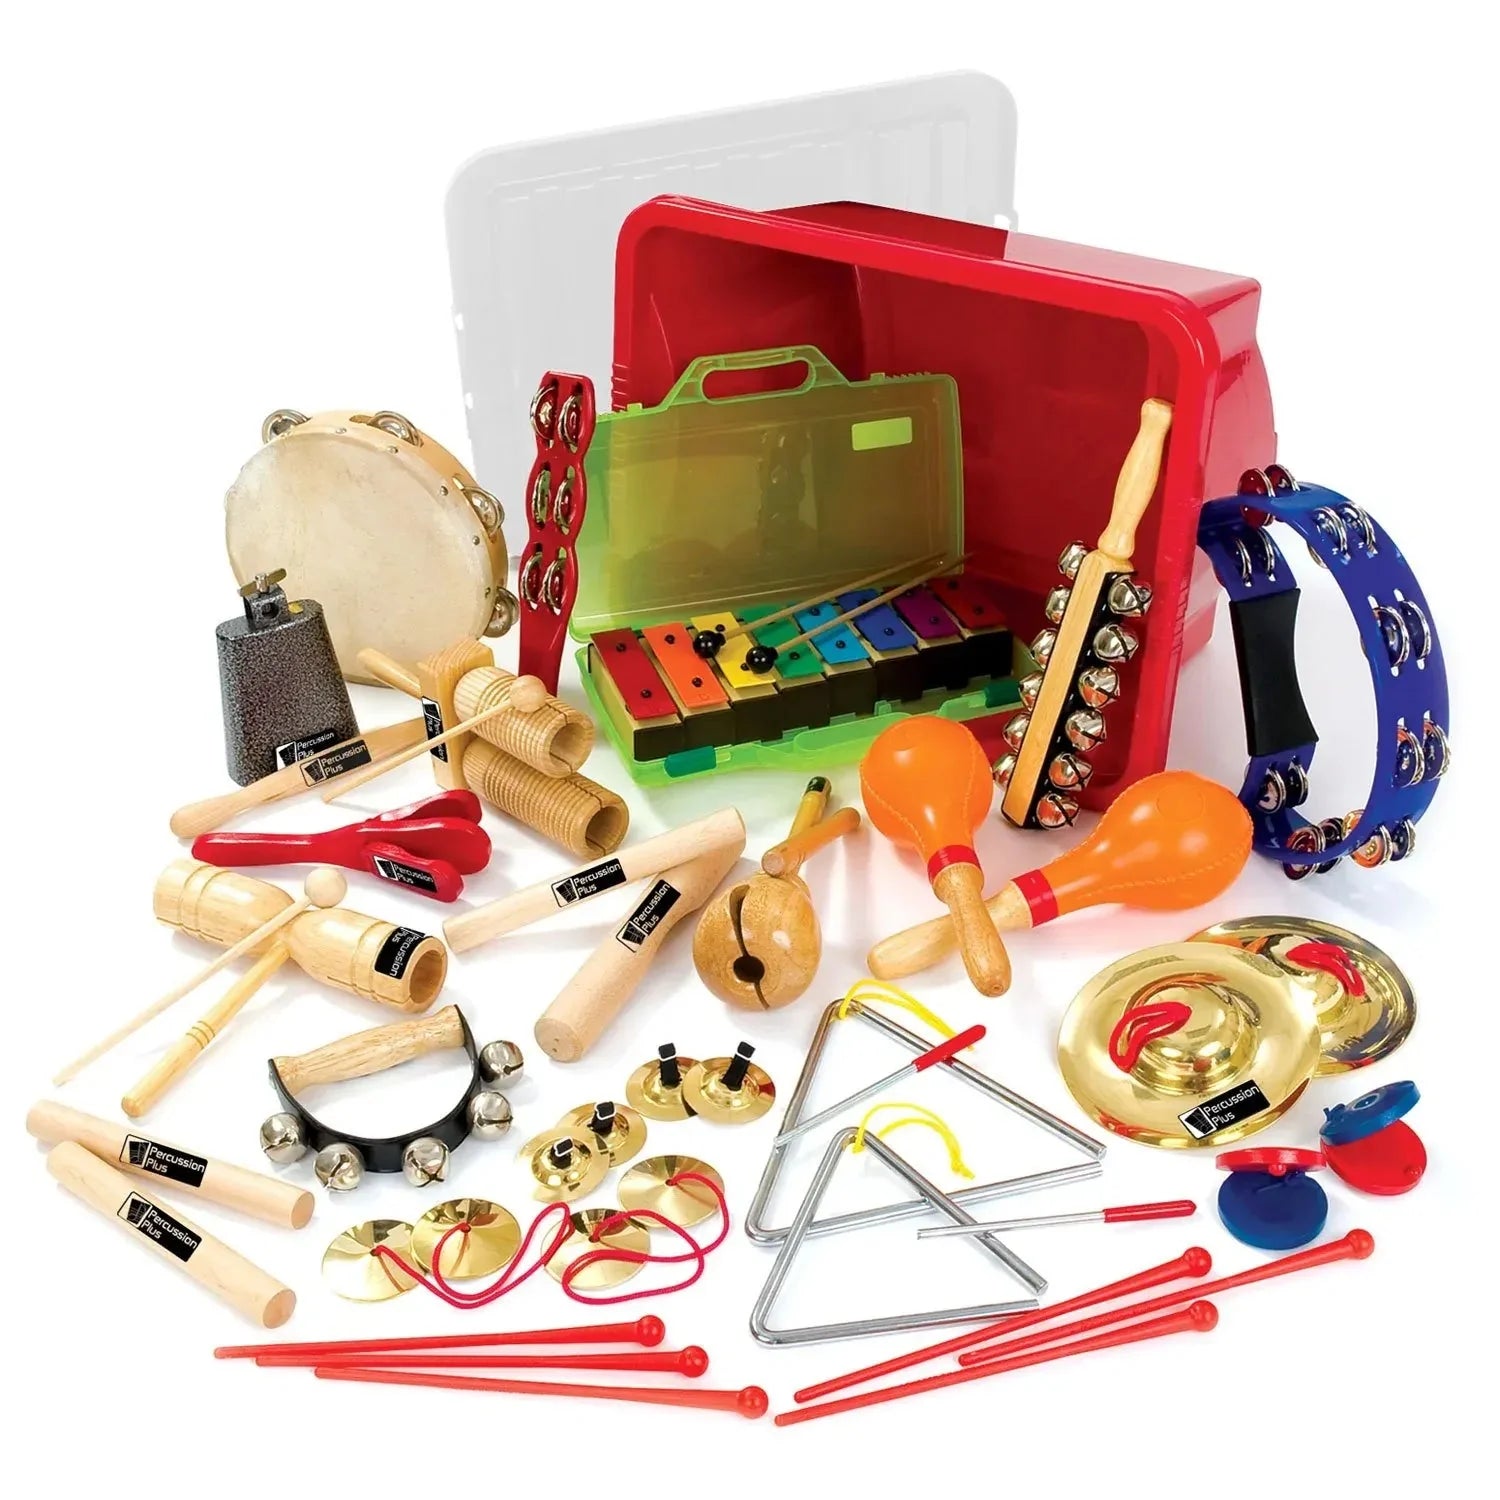 Class percussion pack, The Class percussion pack has sufficient hand held percussion instruments for up to 30 pupils The Class percussion pack is suitable for Key Stages 1 and 2. A great classroom resource for children who will love the musical instruments and teachers will also value the quality of each musical piece. All genuine Percussion Plus quality instruments. Percussion Classpack. Sufficient hand held percussion for up to 30 pupils Suitable for Key Stages 1 and 2. All genuine Percussion Plus quality